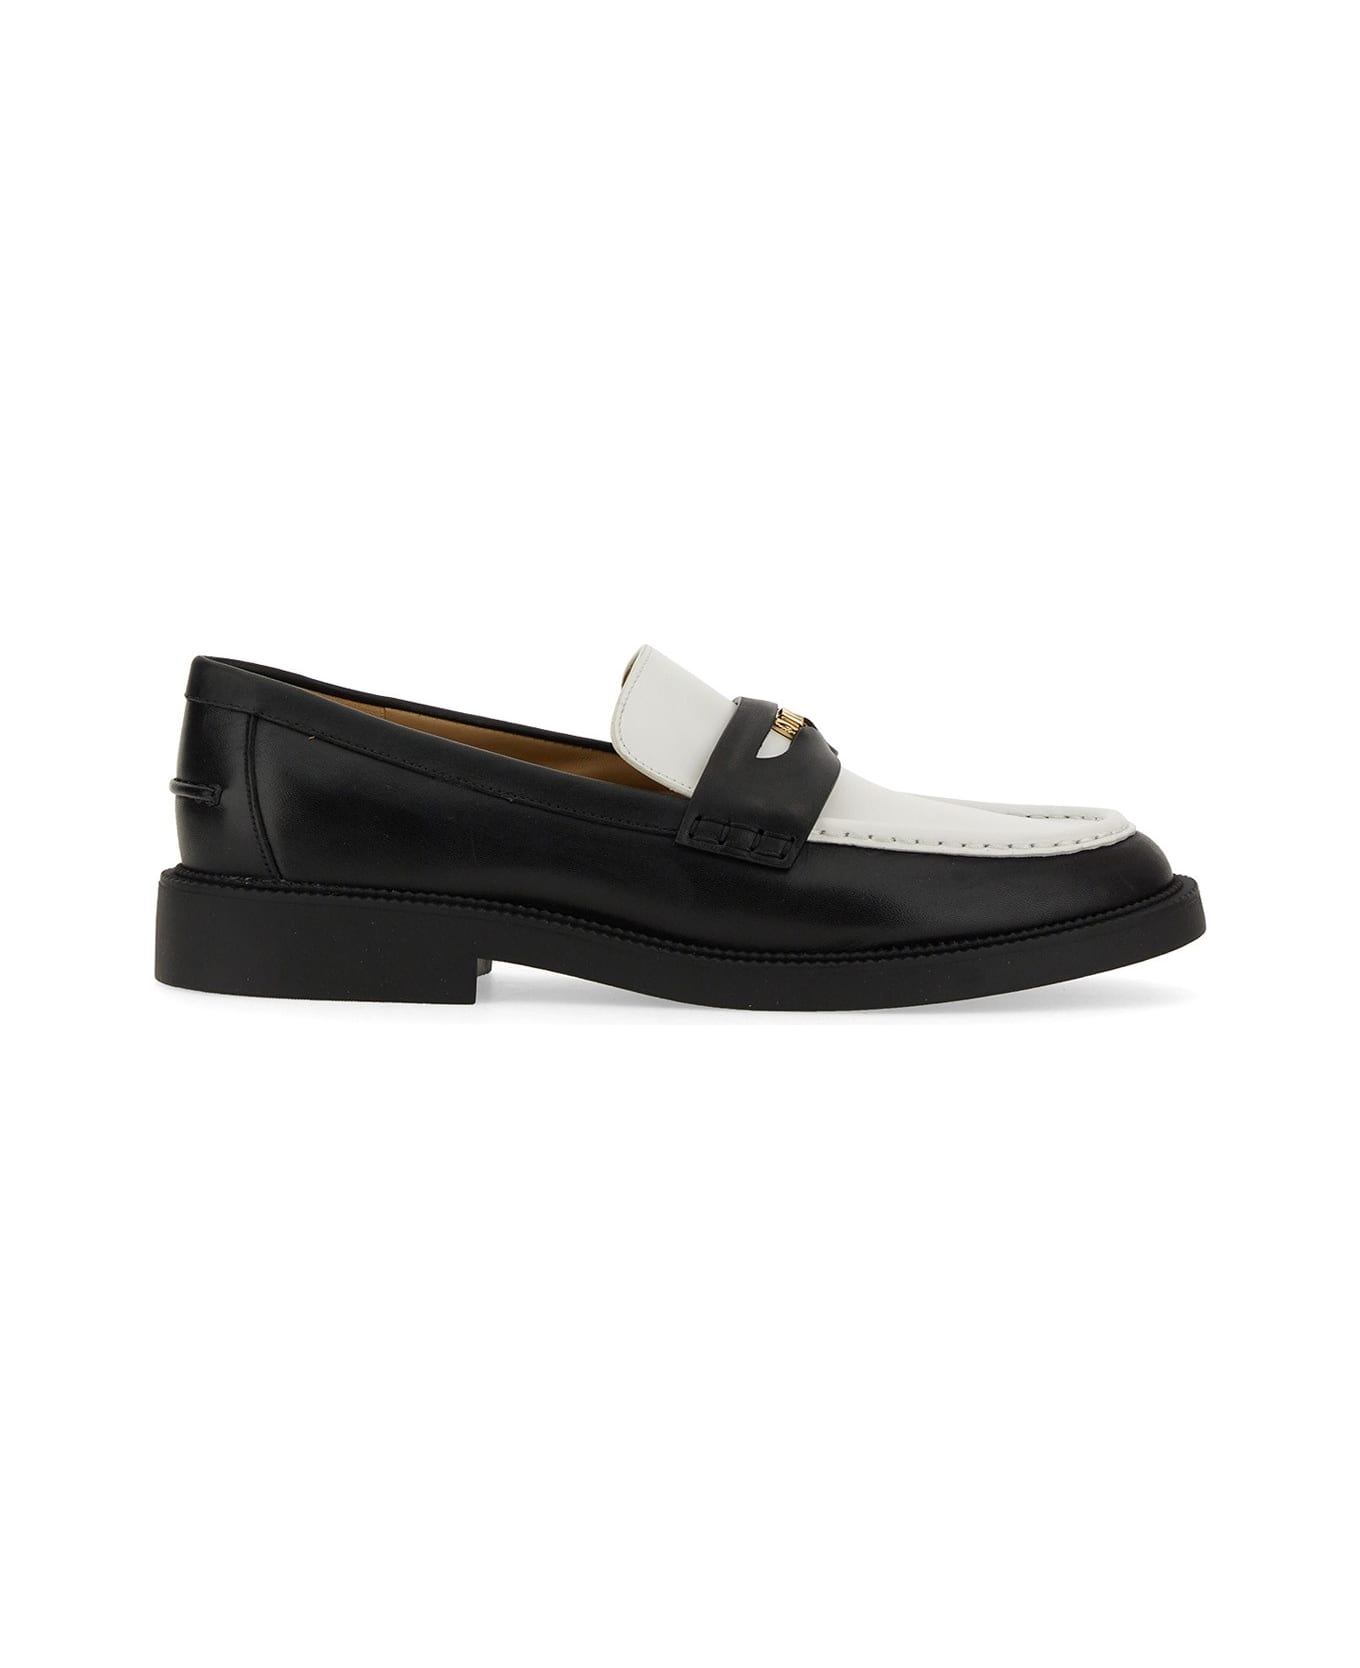 MICHAEL Michael Kors Loafer With Coin - NERO